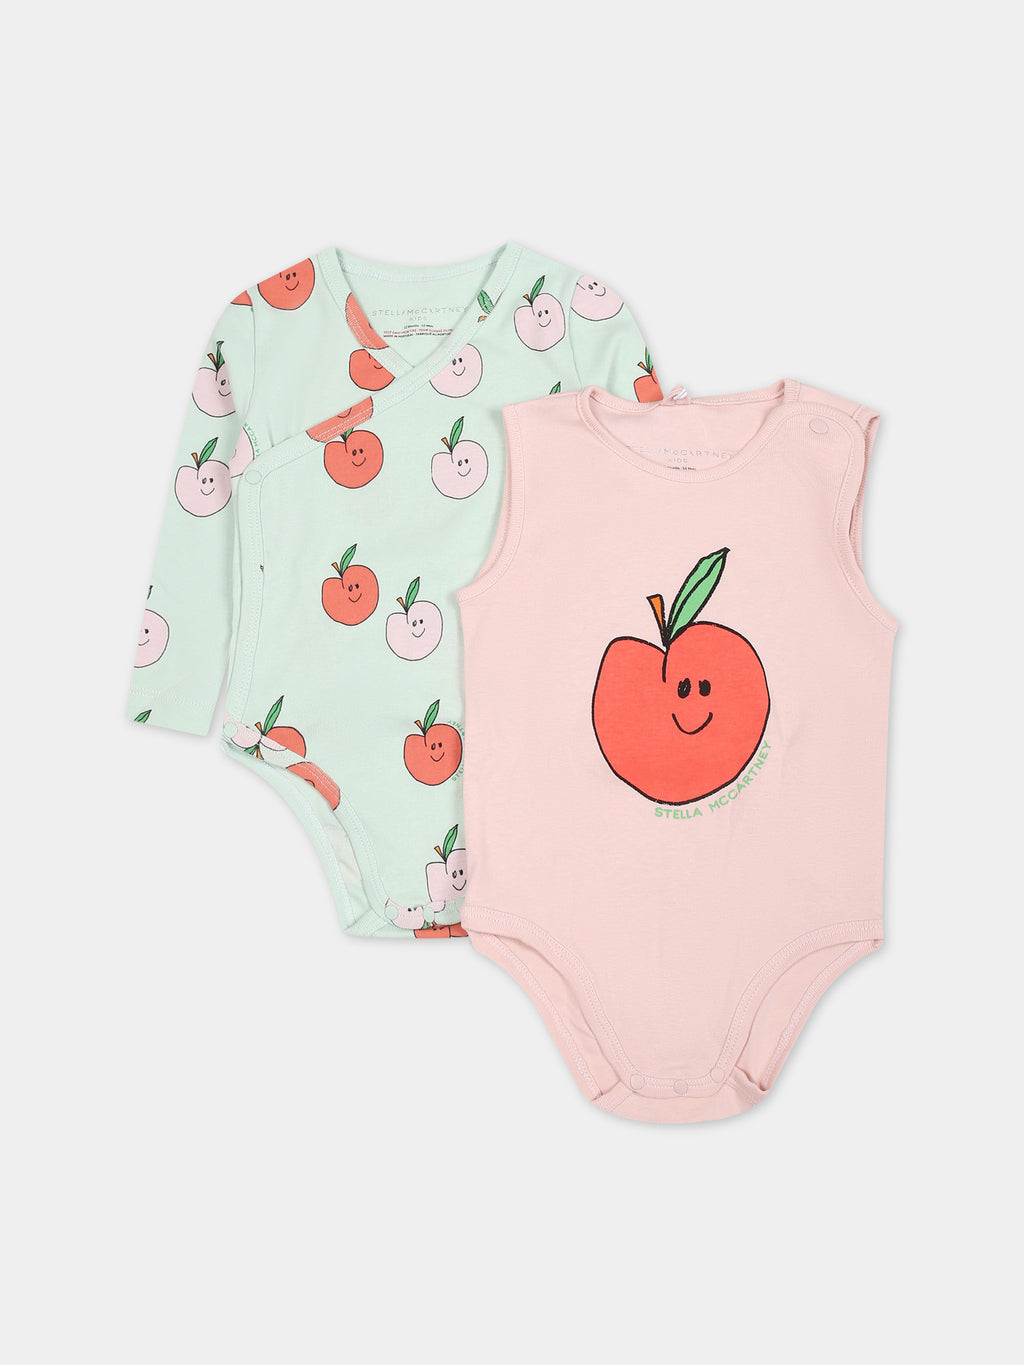 Multicolor set for baby girl with apples